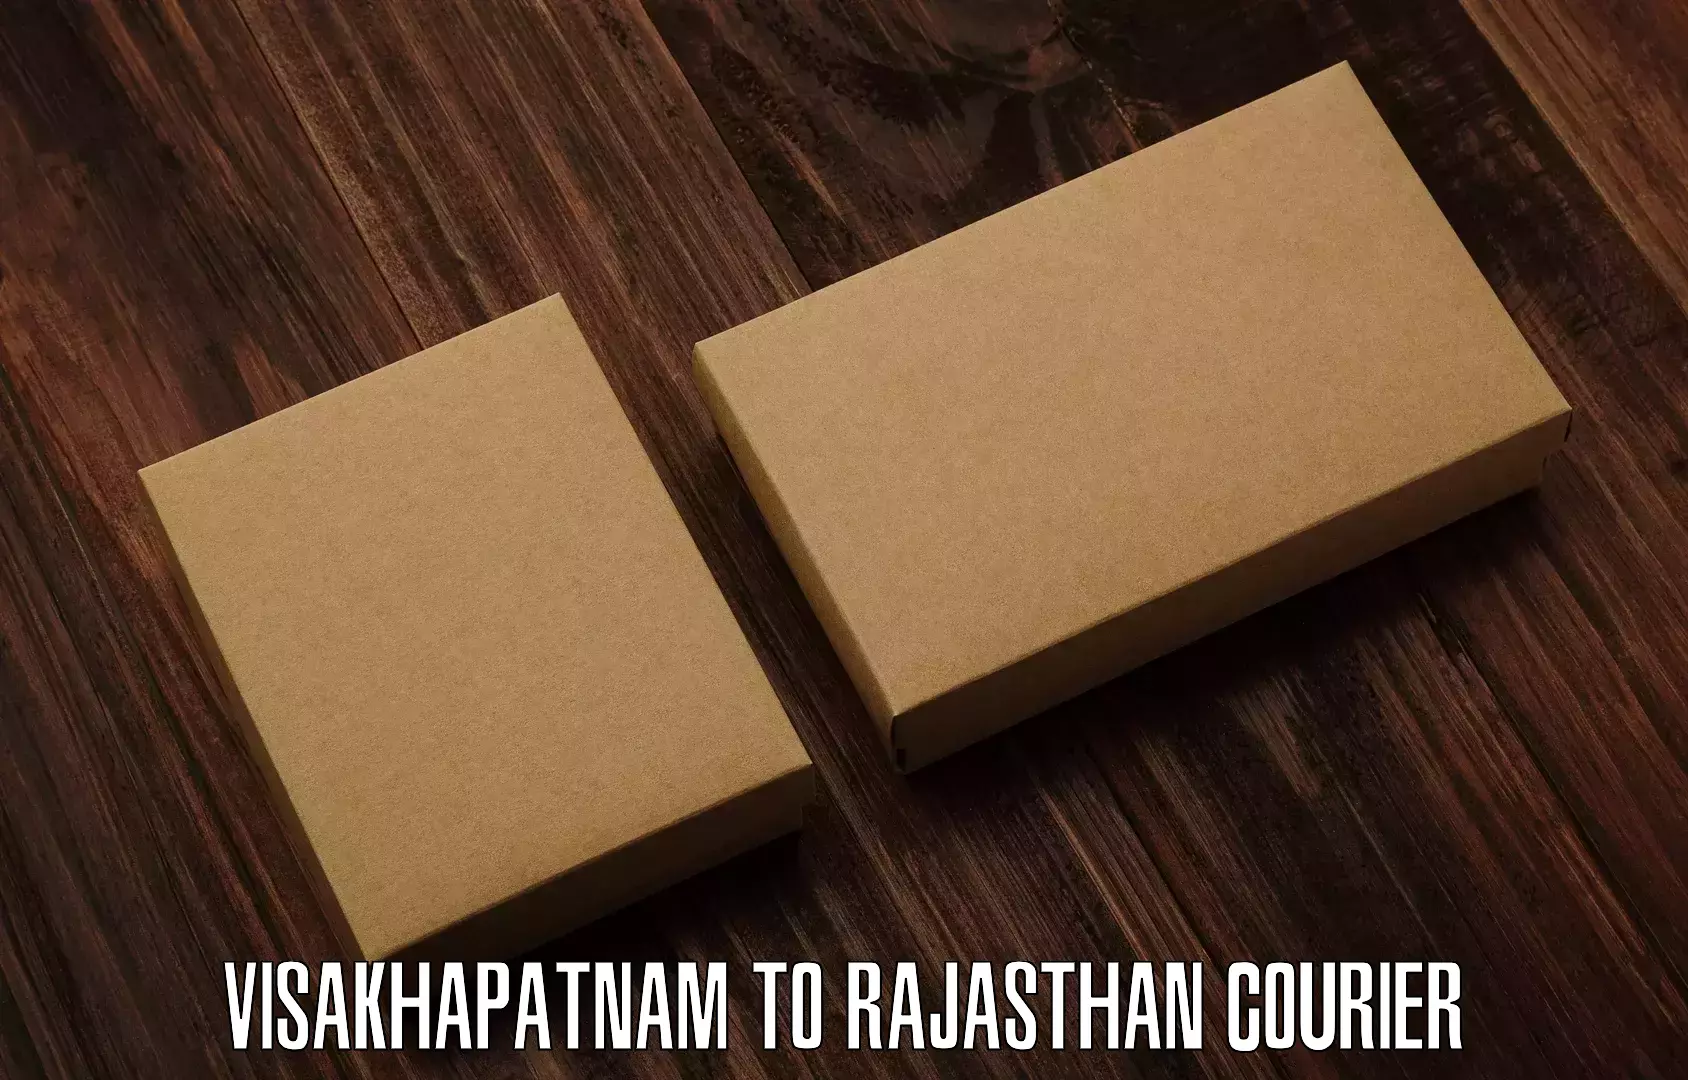 Local delivery service Visakhapatnam to Pali